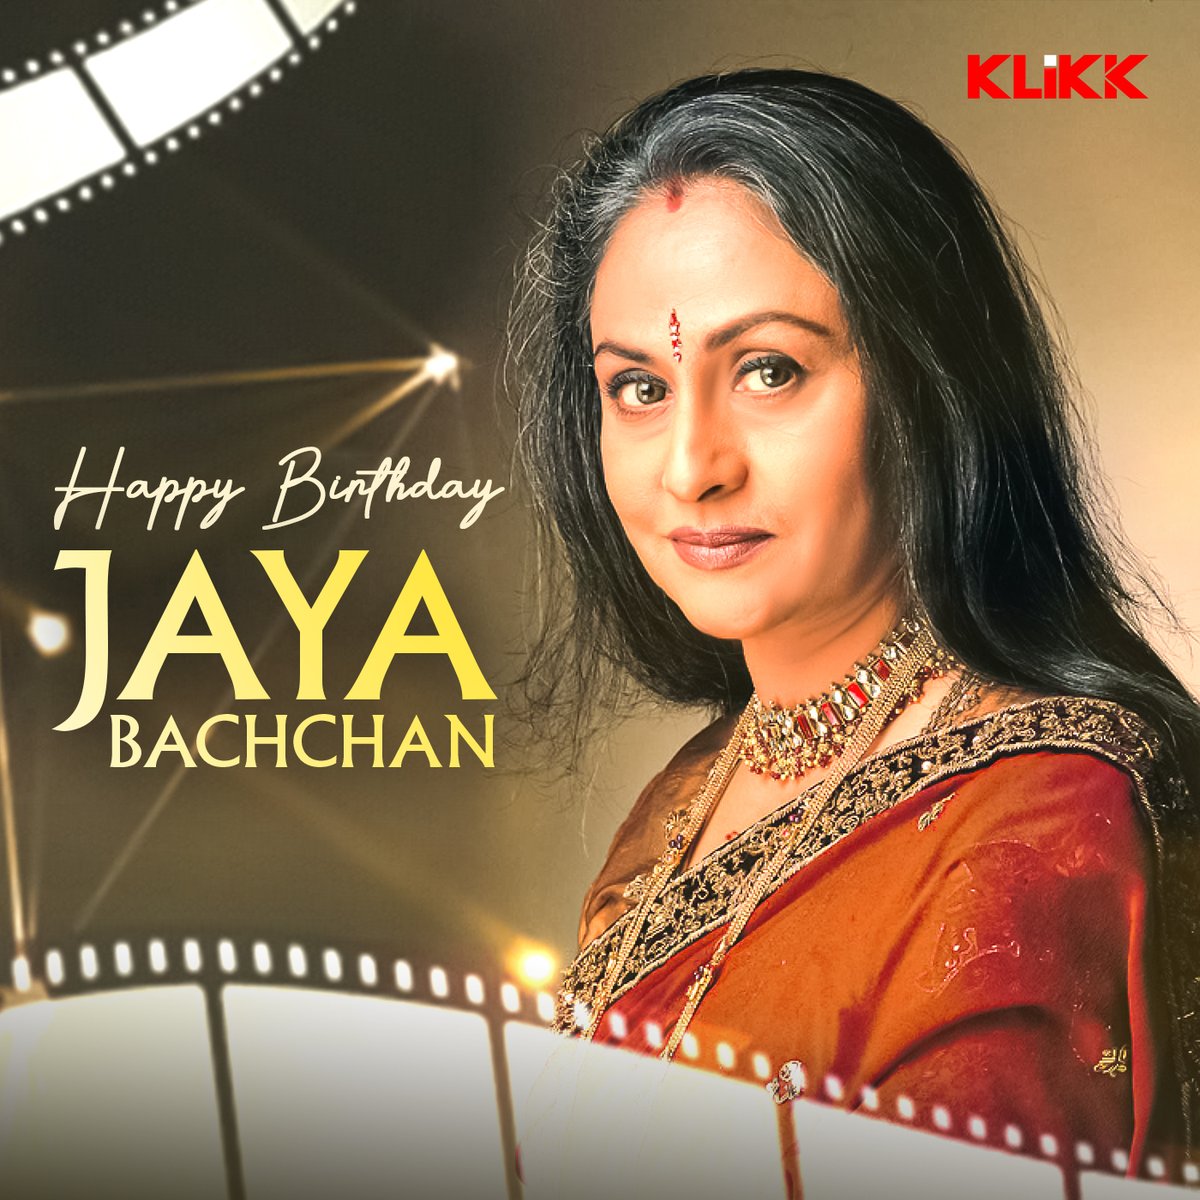 Happy Birthday to the ever graceful and talented @JayaBachchan ! May your special day be filled with love, laughter, and endless joy. 🎉🎂 #Klikk